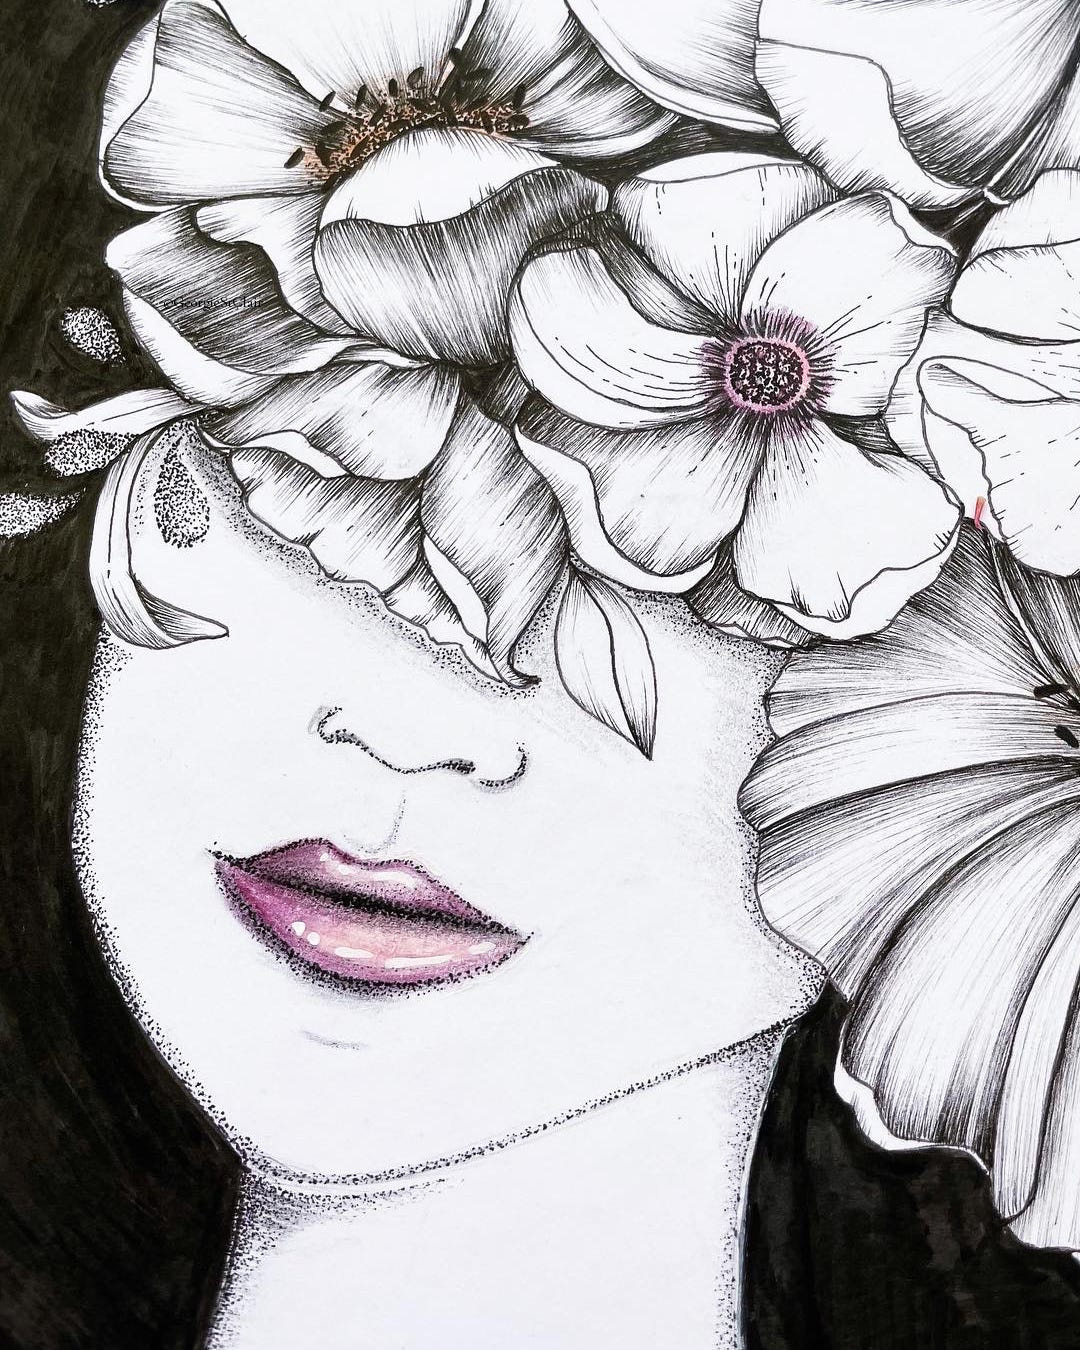 Detail 2 from this weeks Floral Portrait Illustration by Georgie St Clair